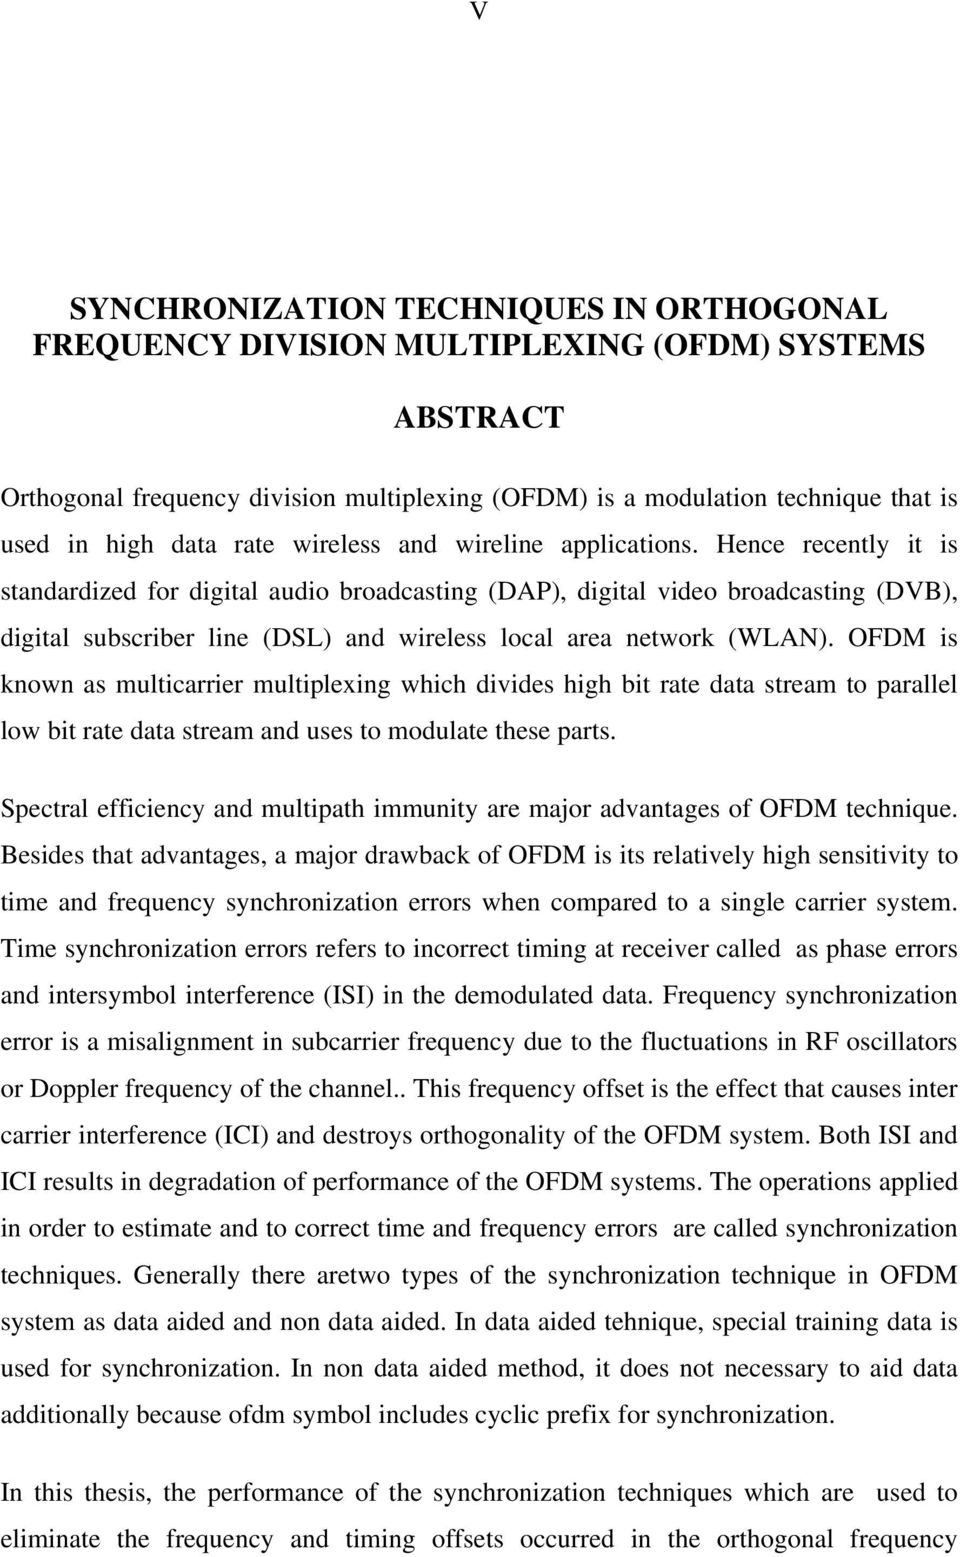 OFDM is ow as multicarrier multiplexig which divides high bit rate data stream to parallel low bit rate data stream ad uses to modulate these parts.